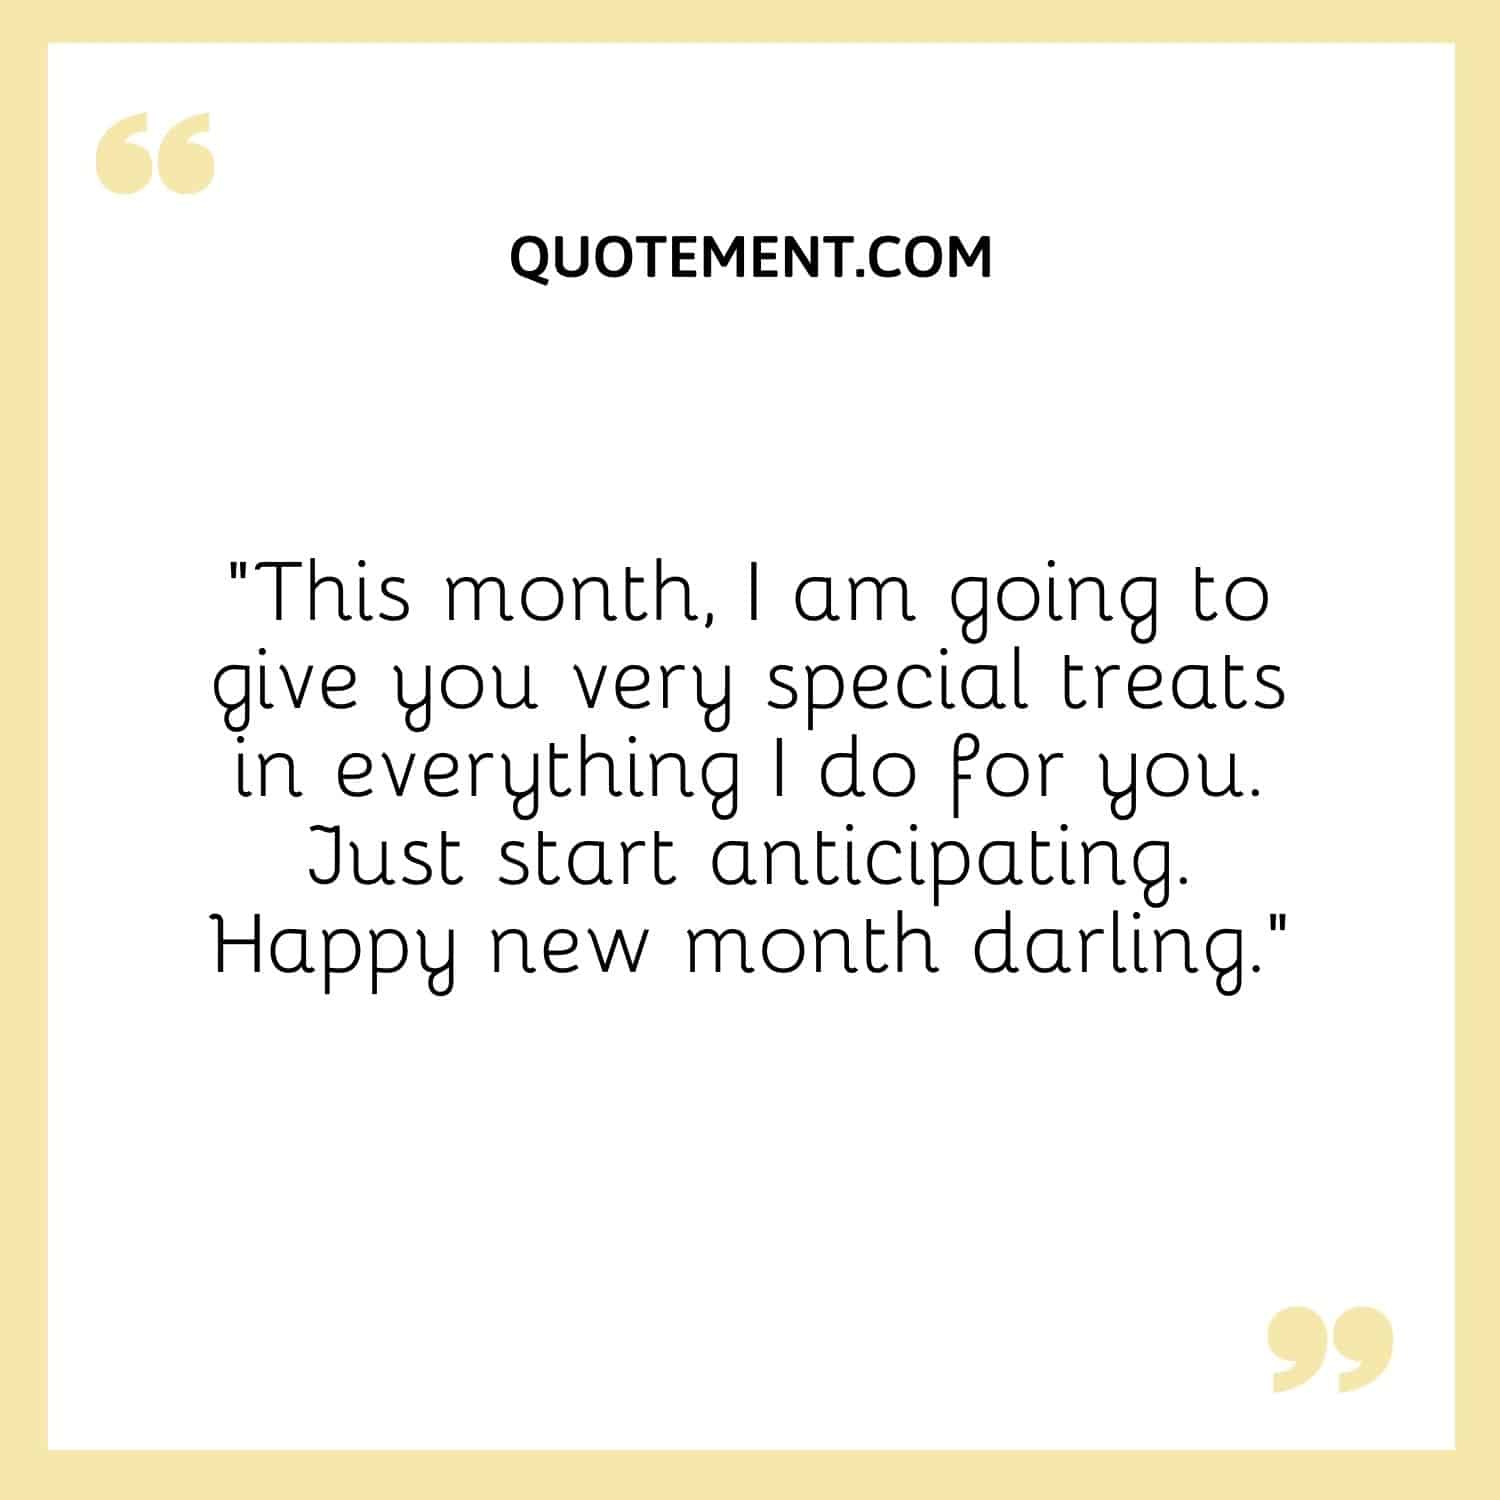 This month, I am going to give you very special treats in everything I do for you